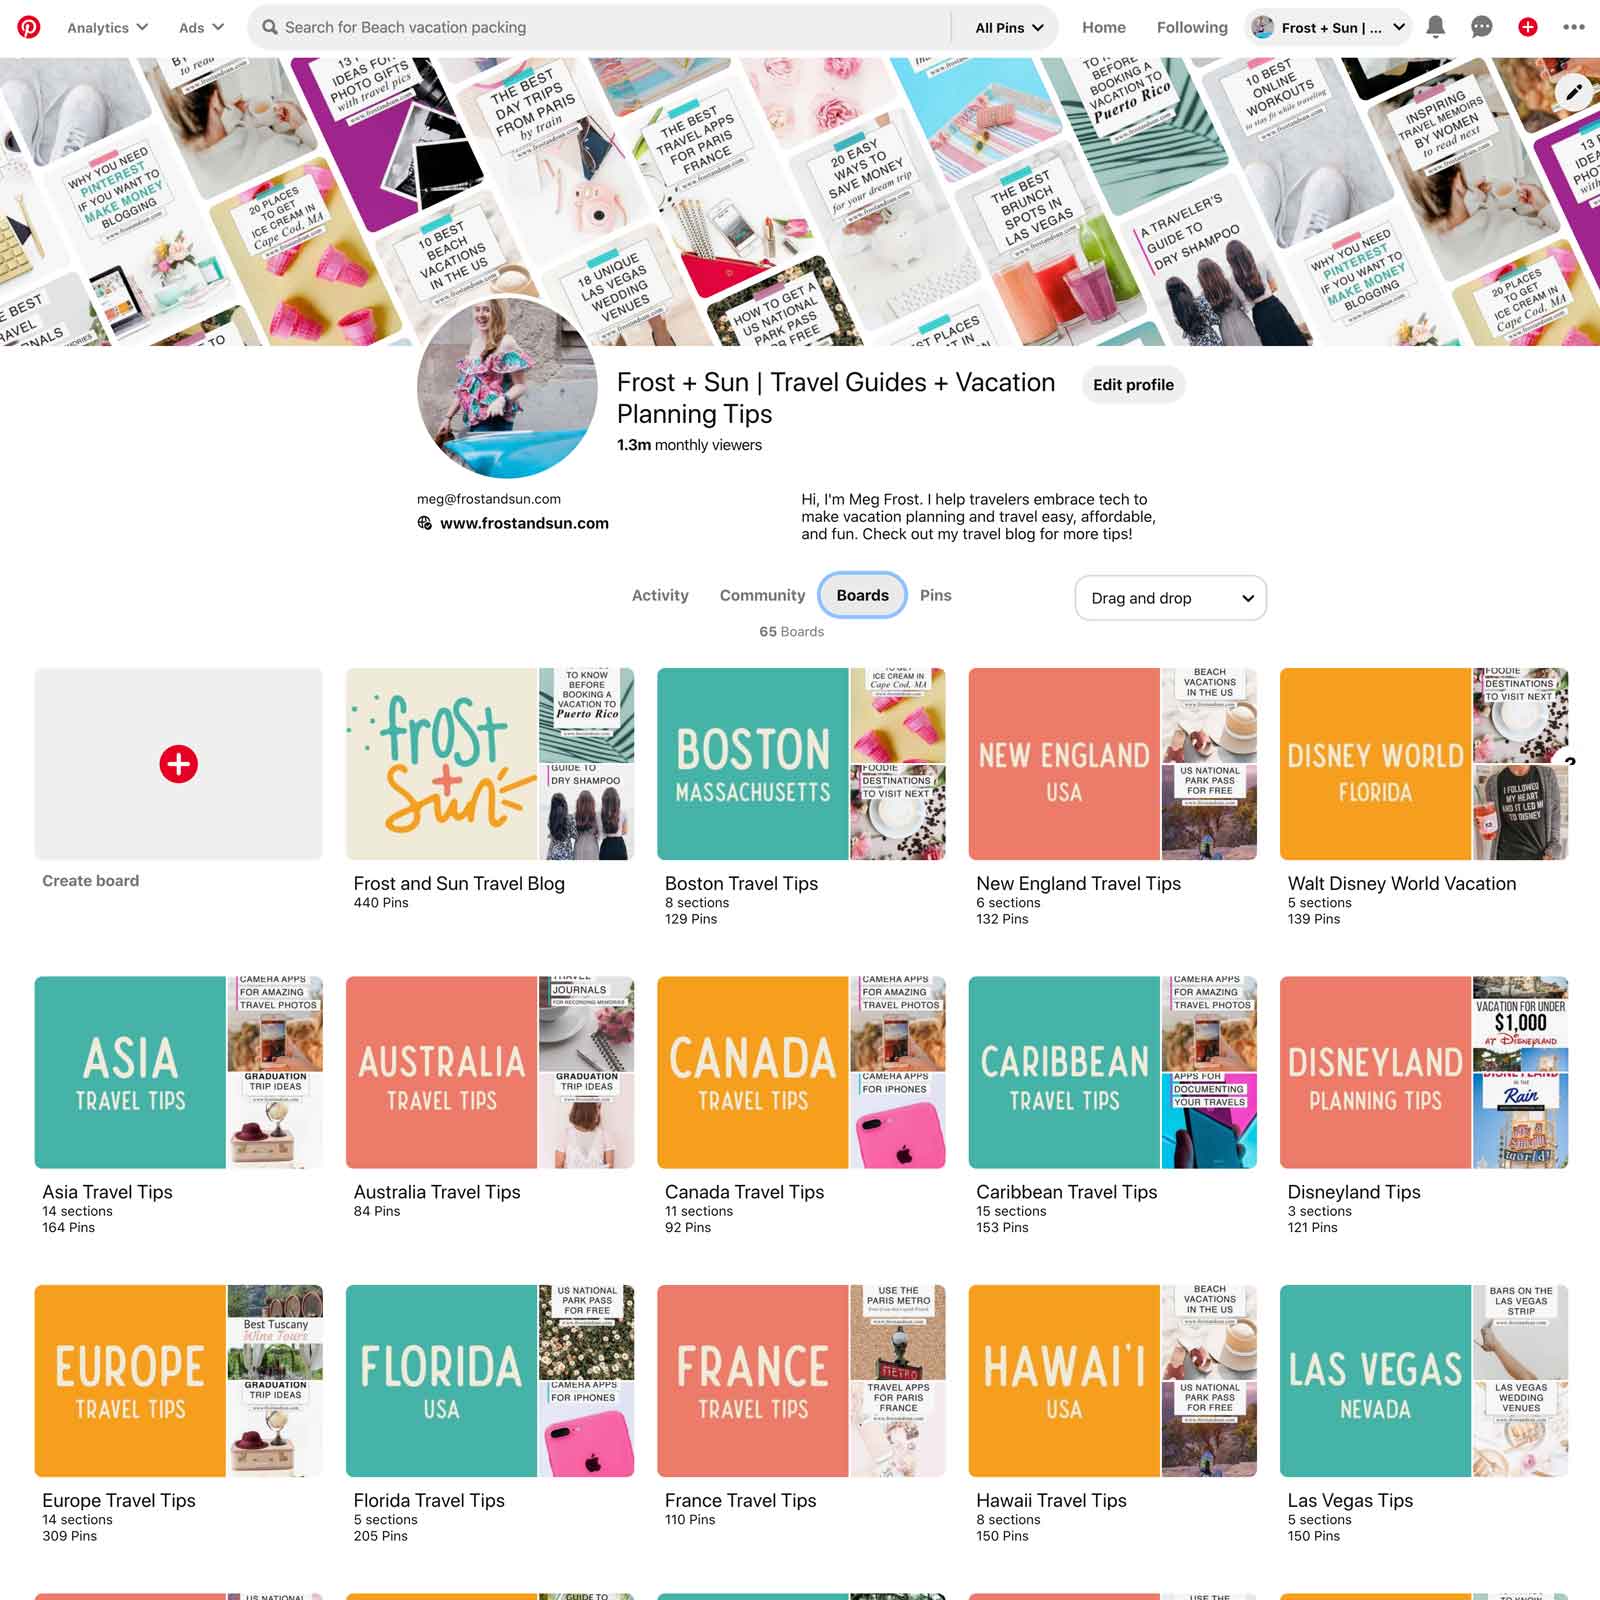 Screenshot of the Pinterest profile page for Frost + Sun.